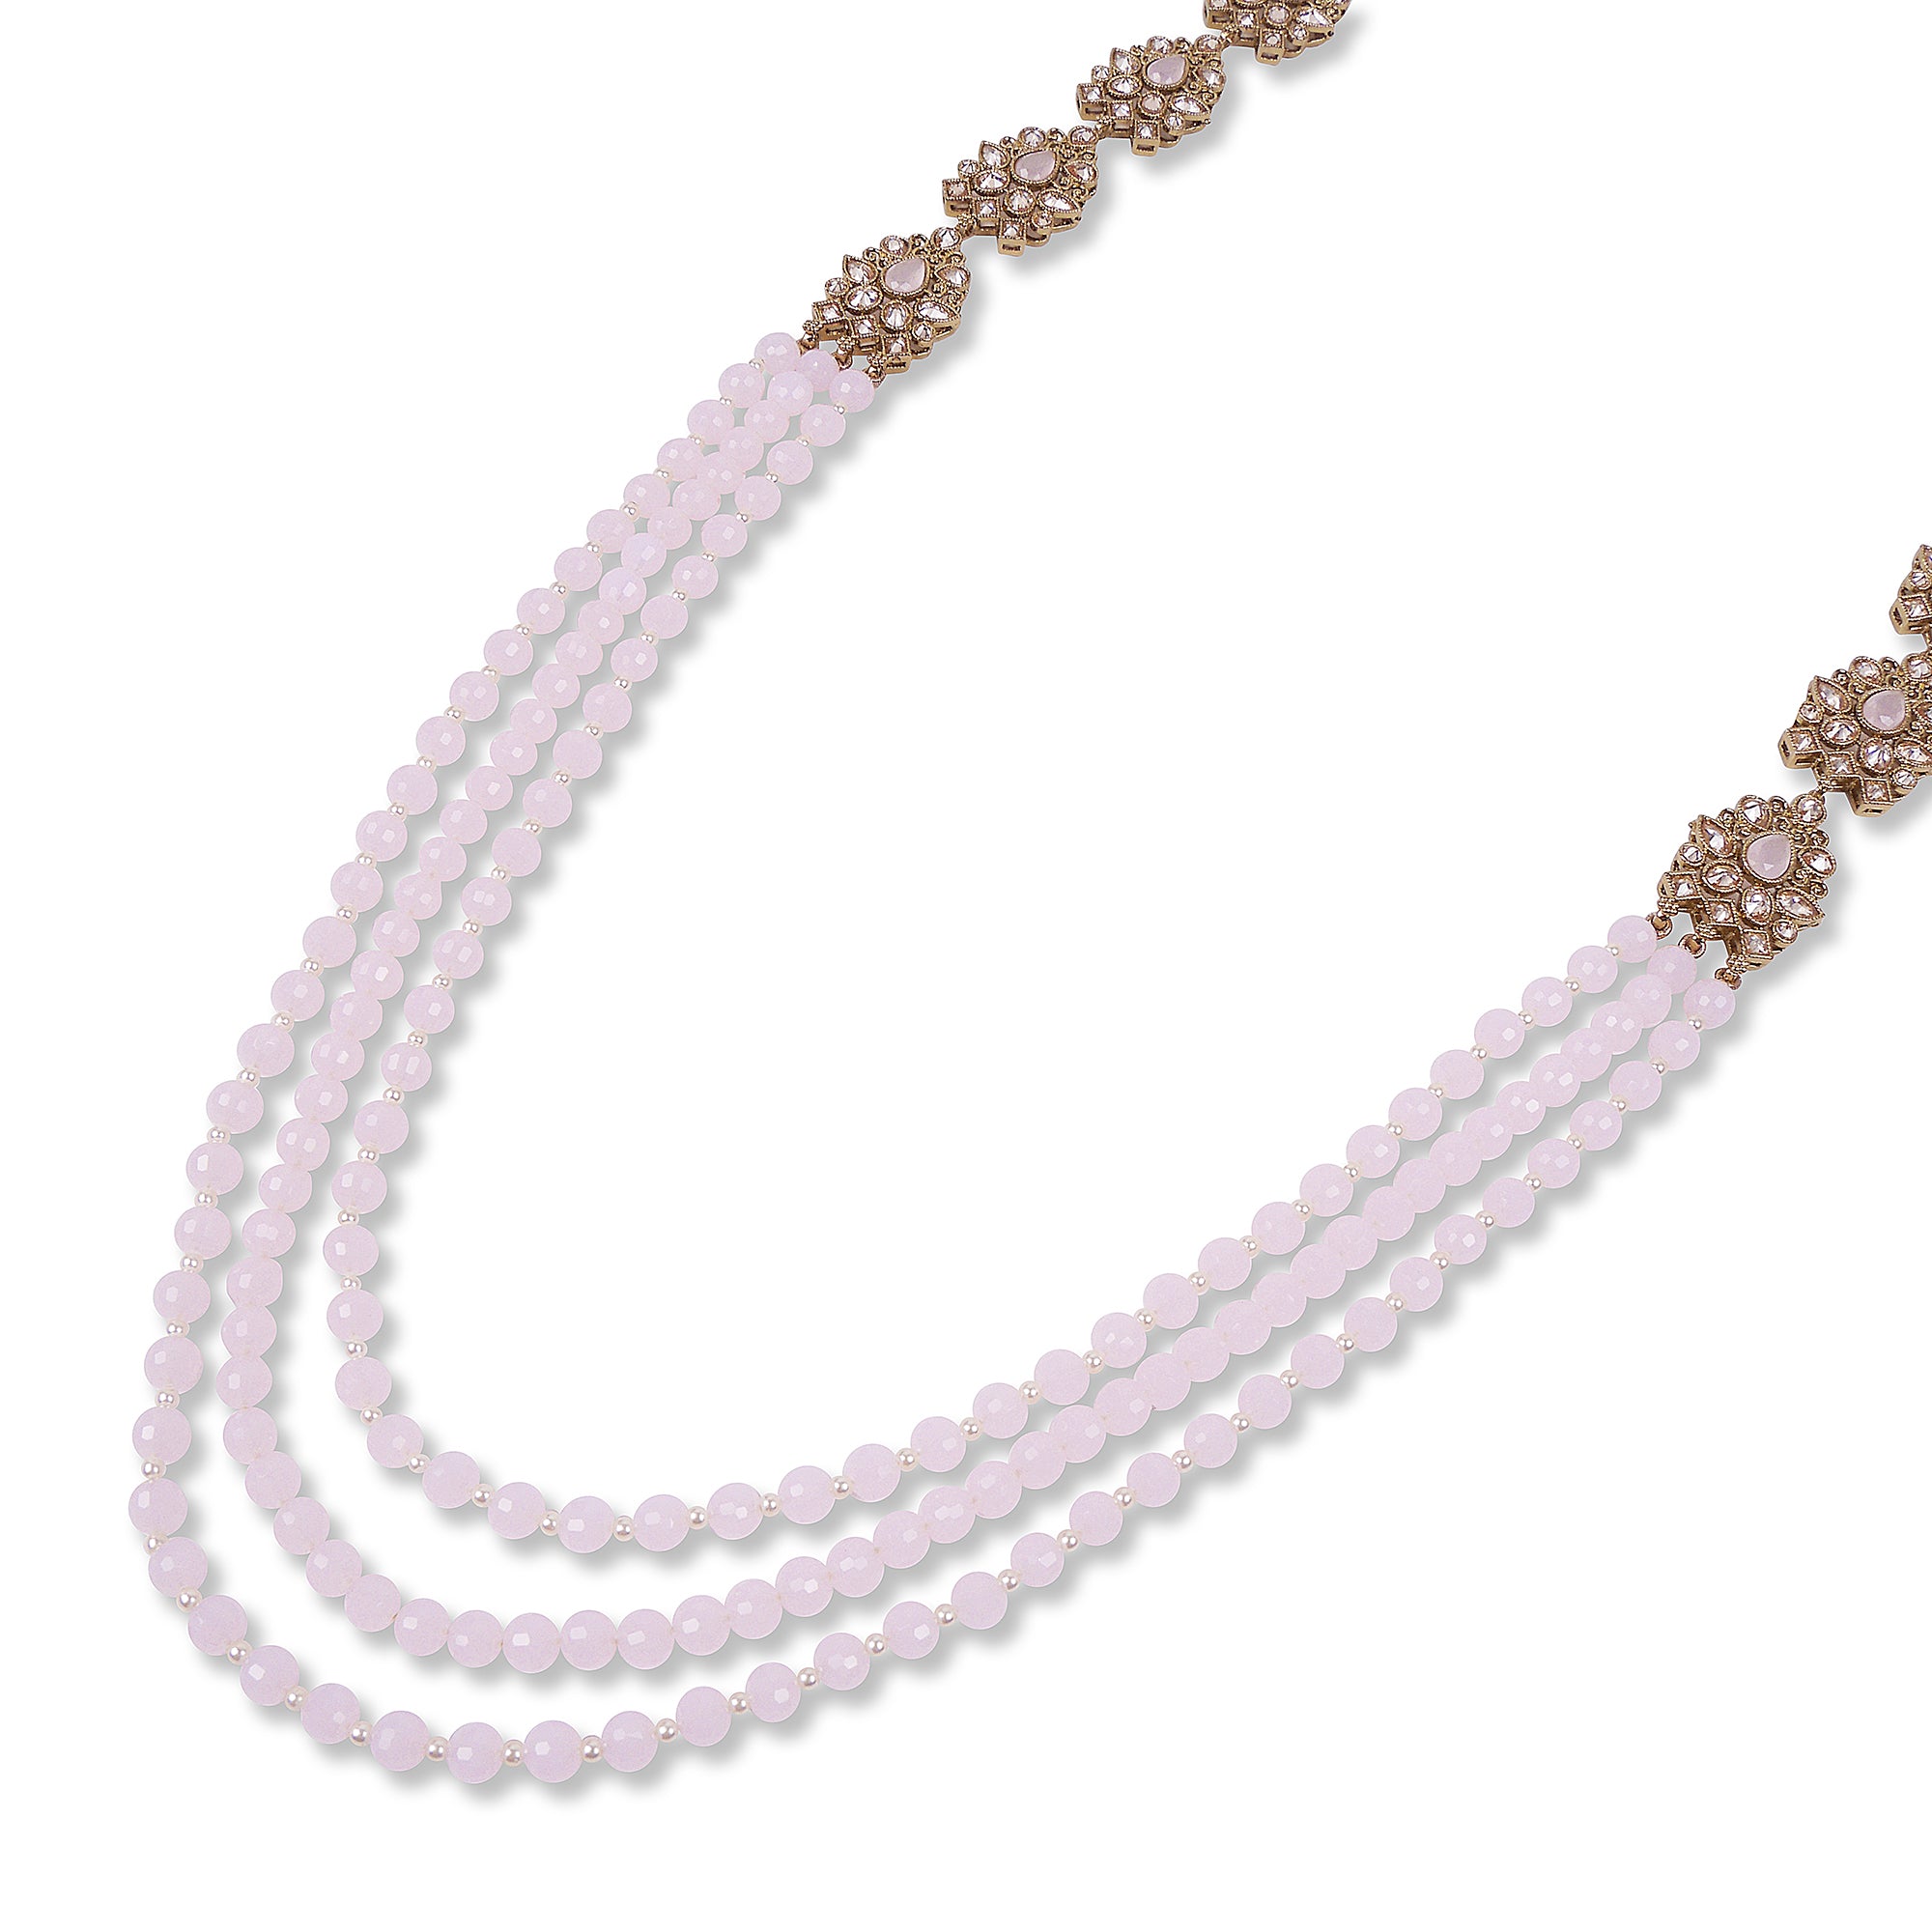 Nihira Long Layered Necklace in Light Pink and Antique Gold